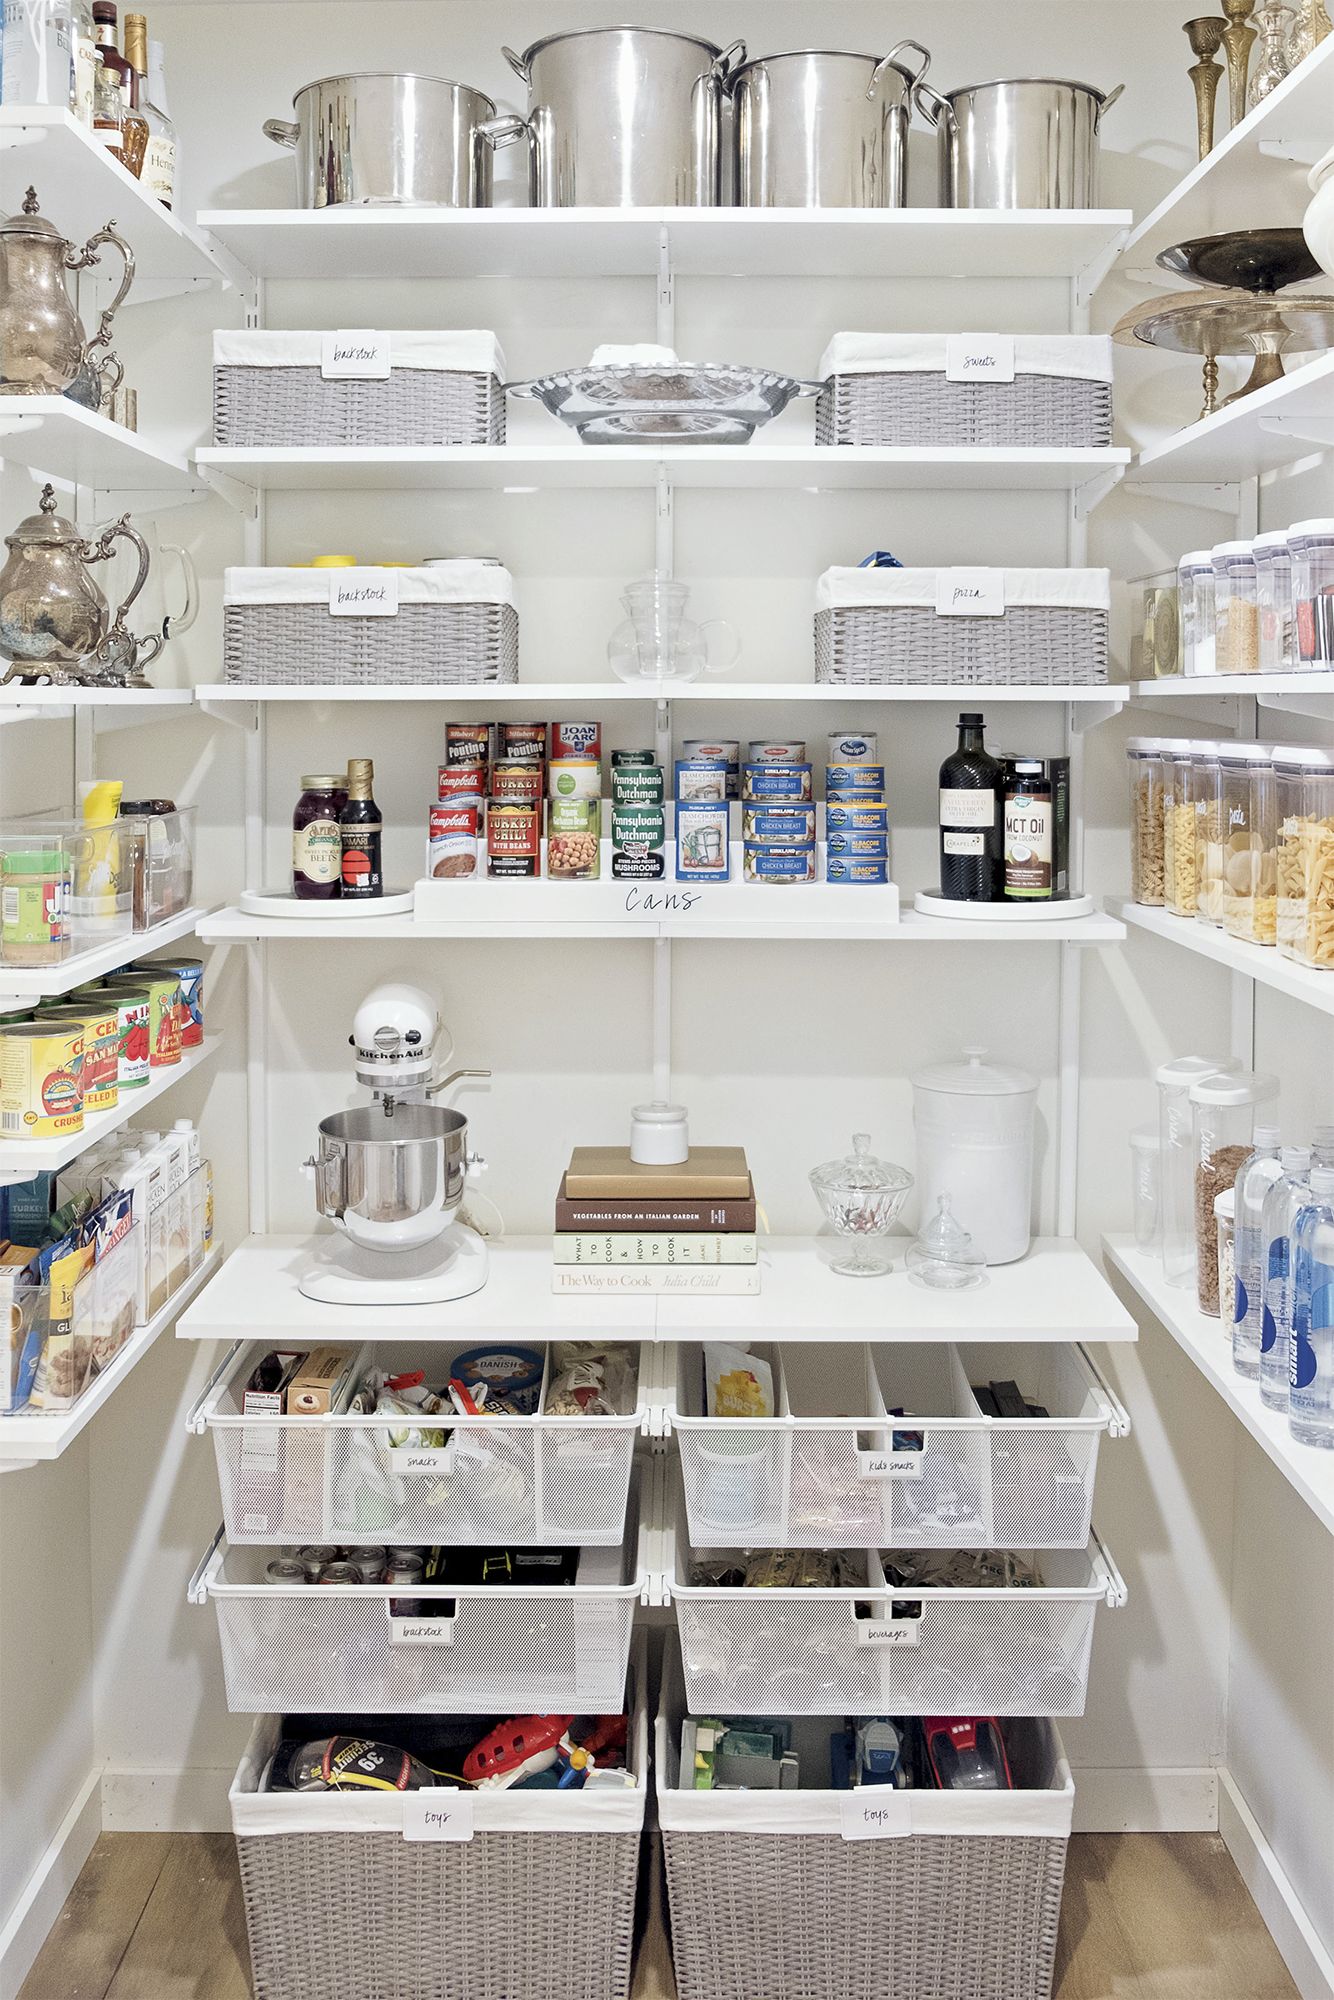 18 Pantry Organization Ideas and Tricks   How to Organize a Pantry